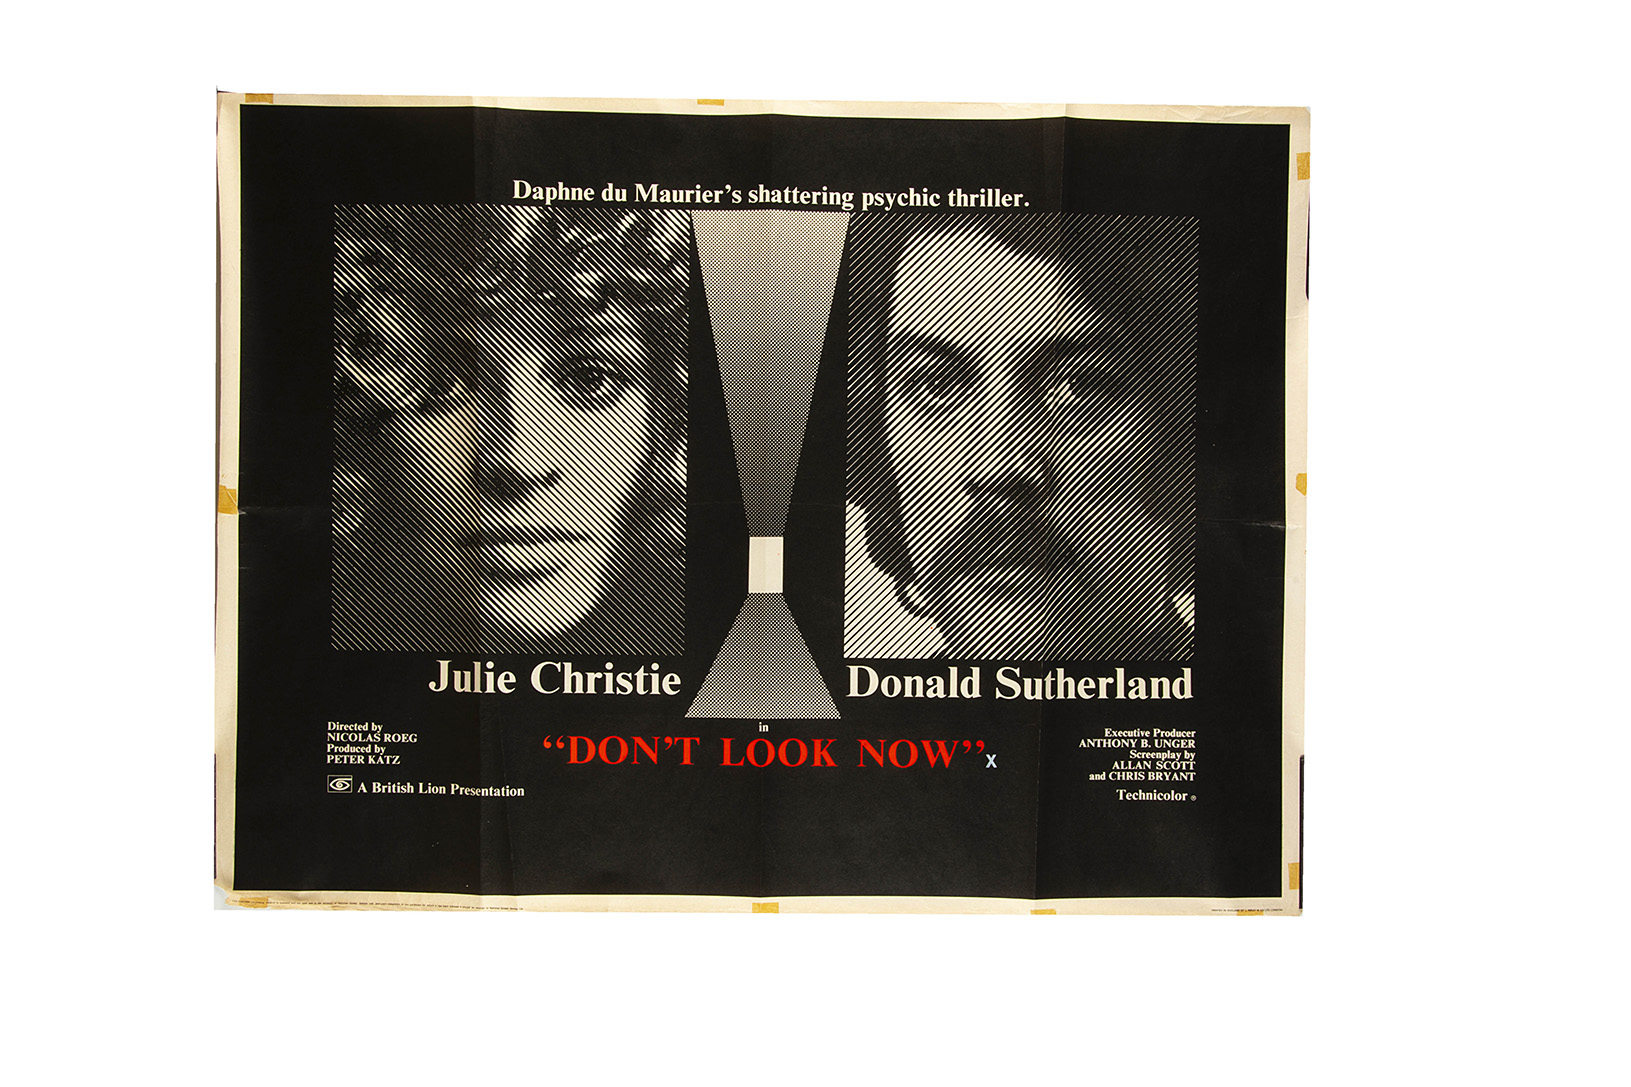 Don’t Look Now Quad Poster, a (1973) UK Quad cinema poster, starring Donald Sutherland and Julie